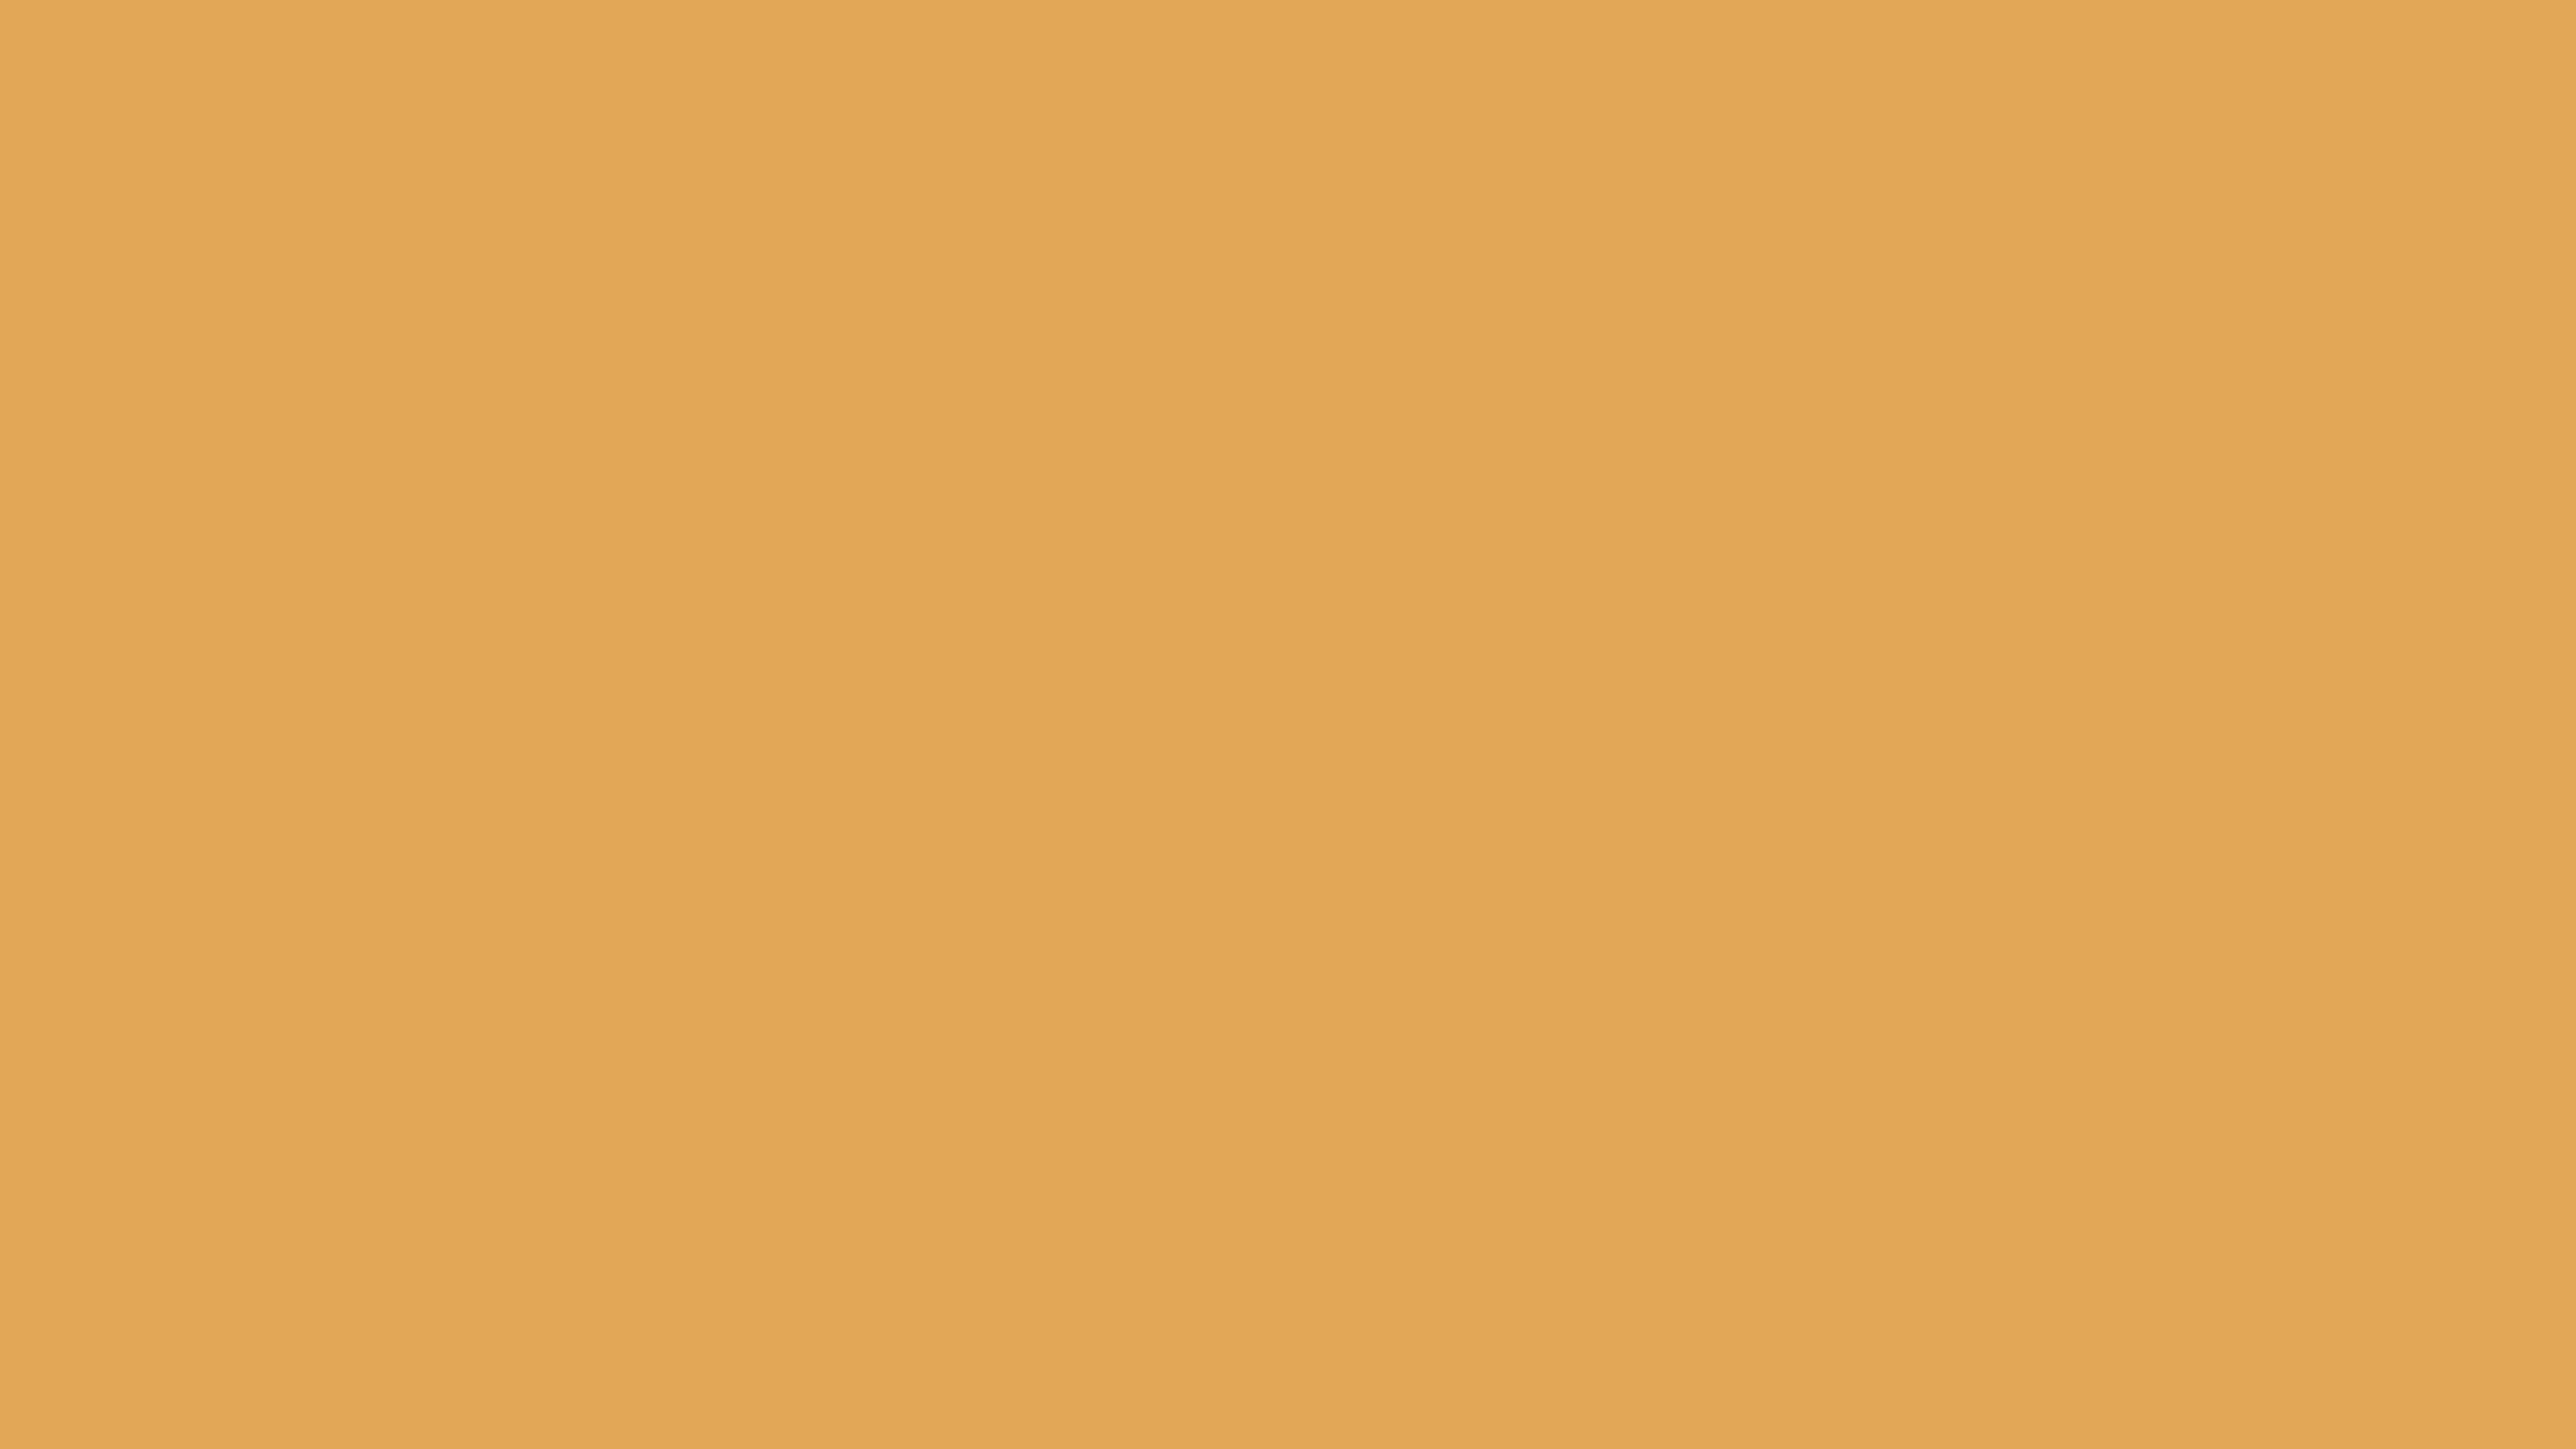 7680x4320 Indian Yellow Solid Color Background